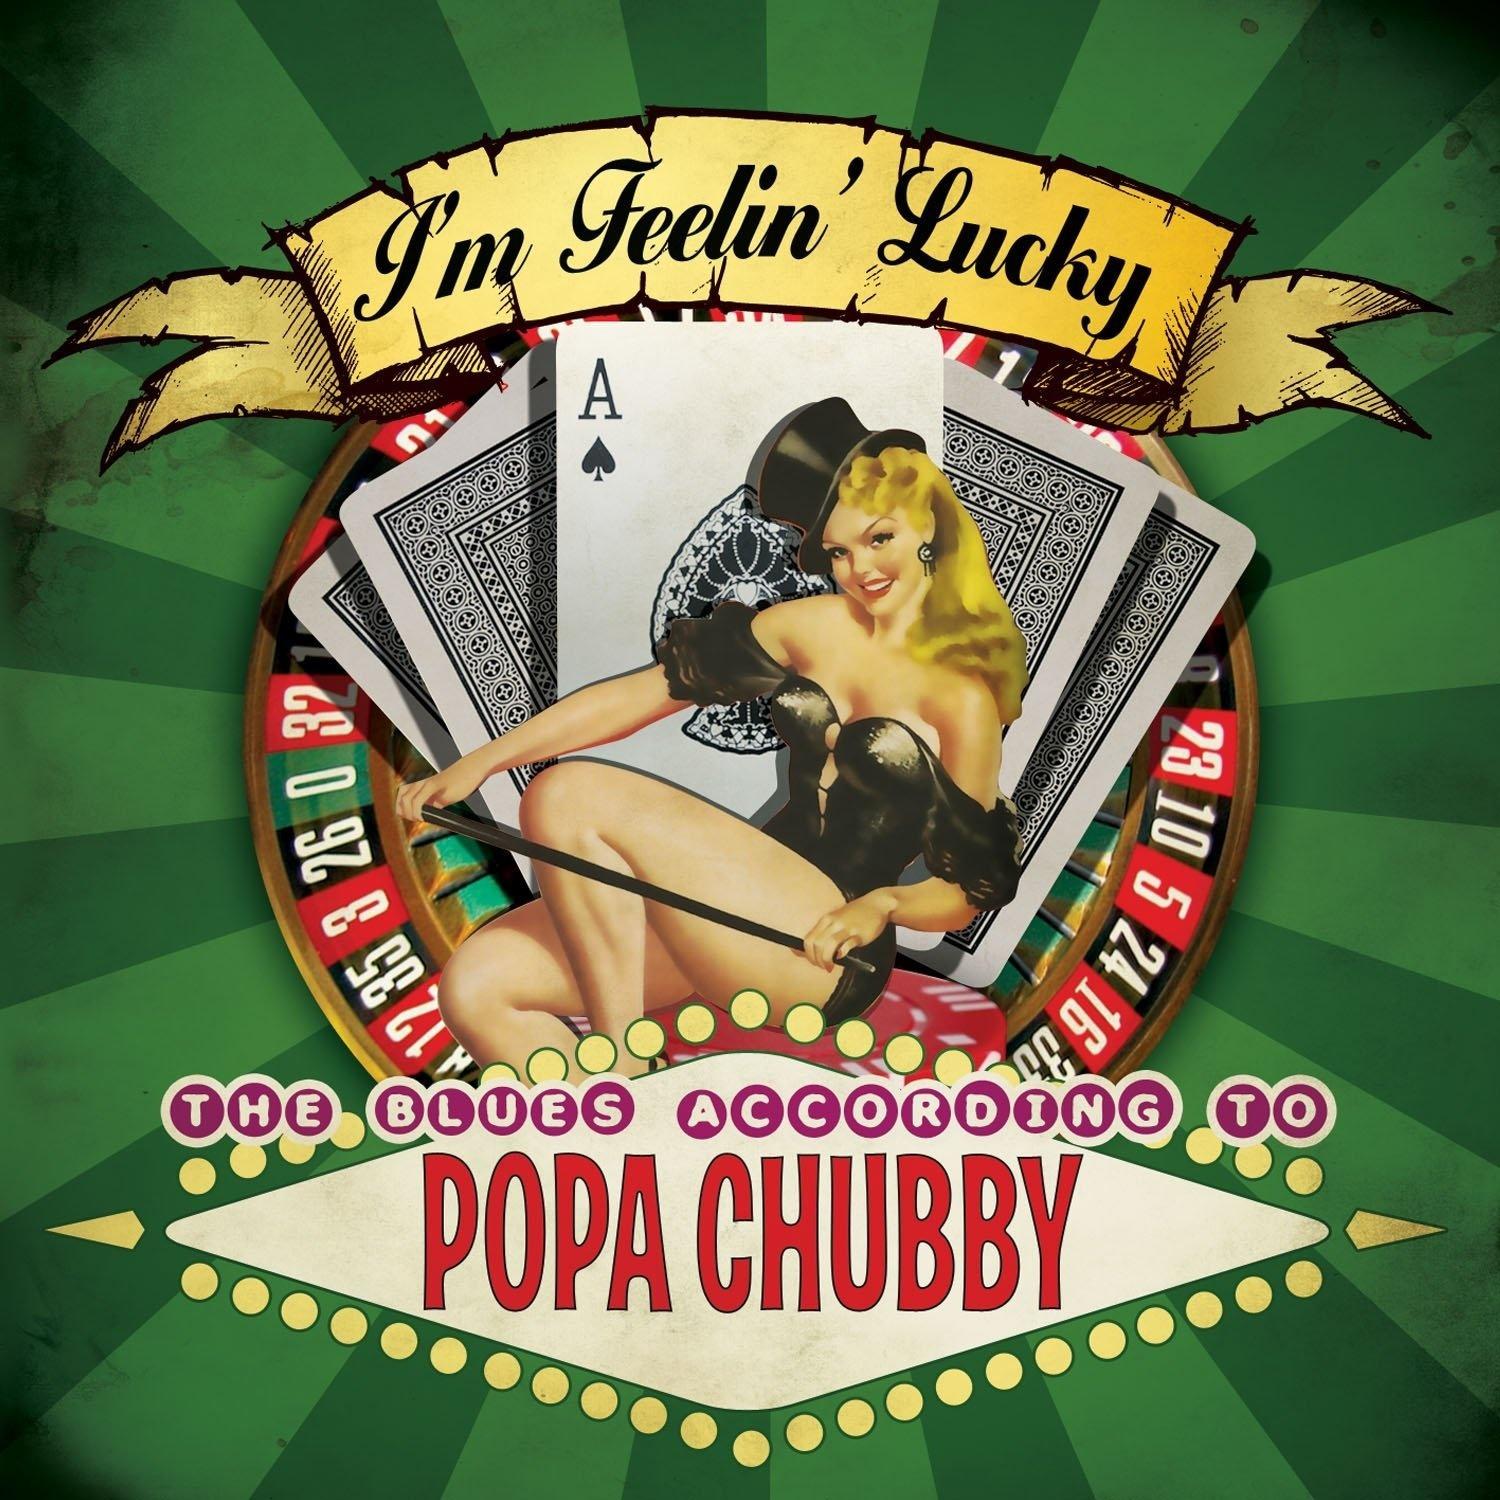 Popa Chubby - One Leg At A Time